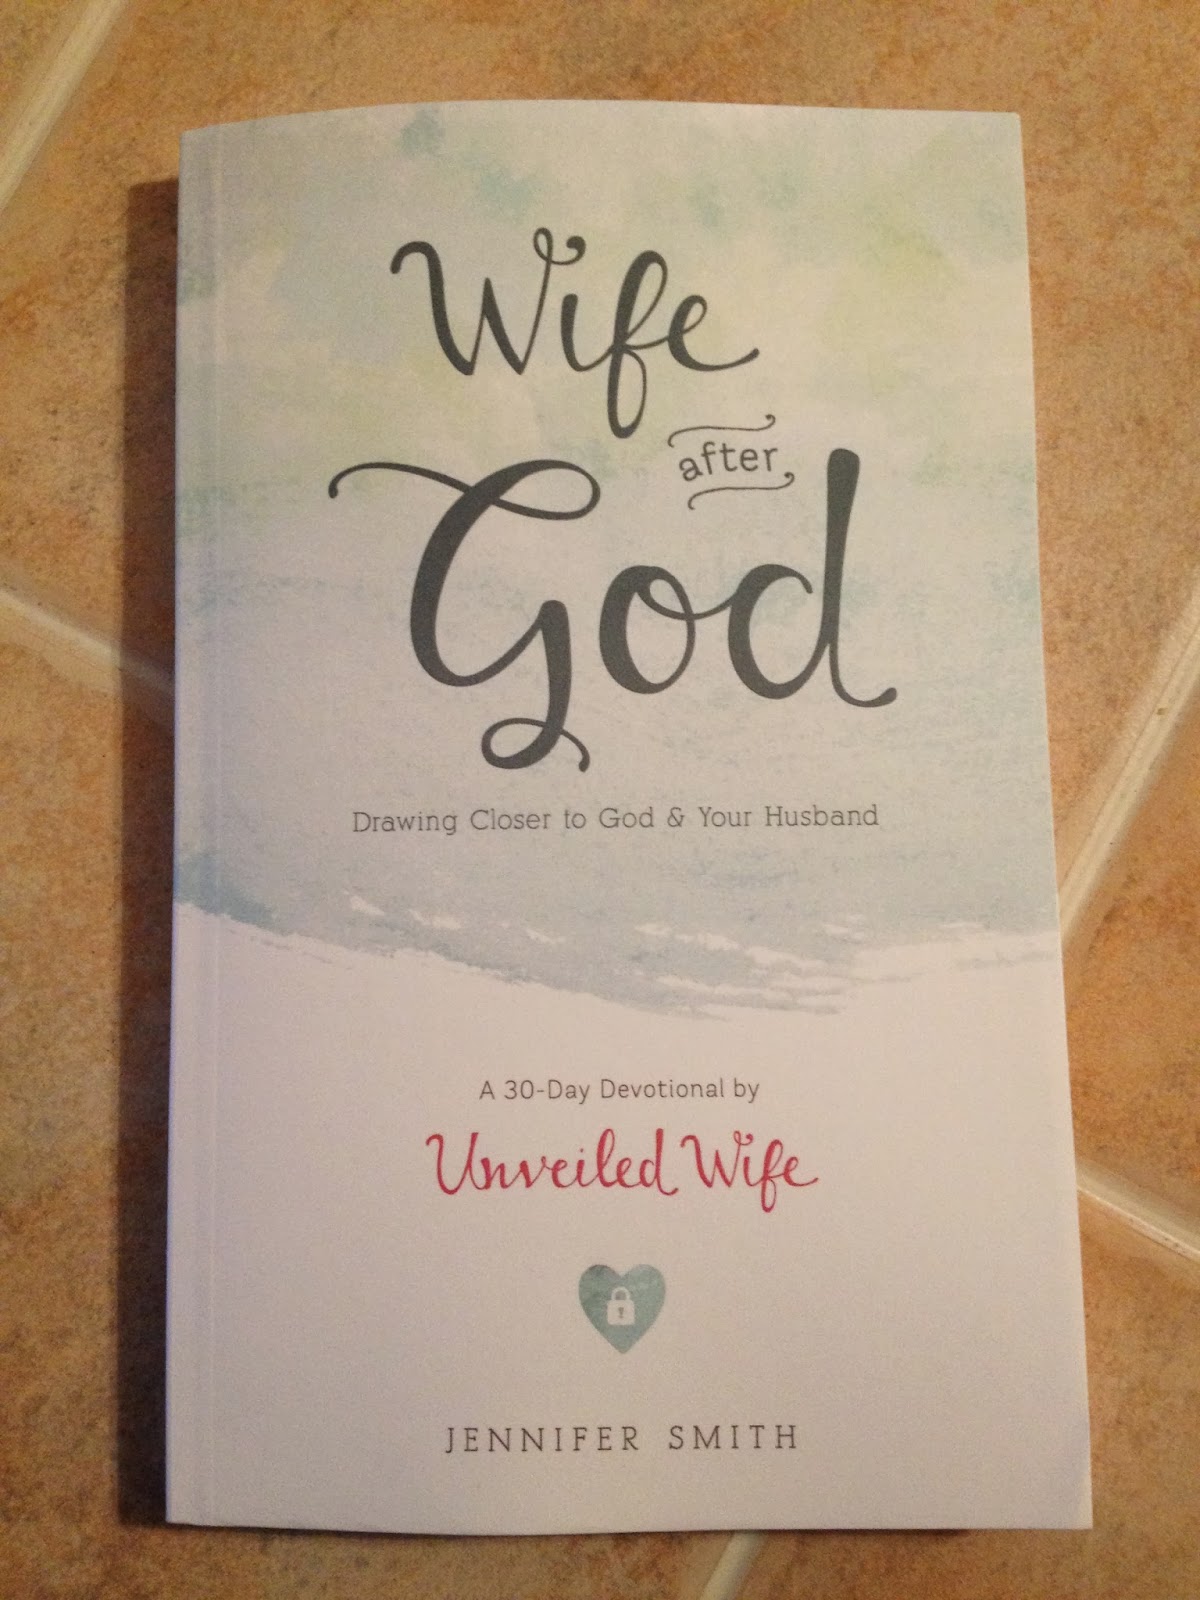 http://unveiledwife.com/wife-after-god/